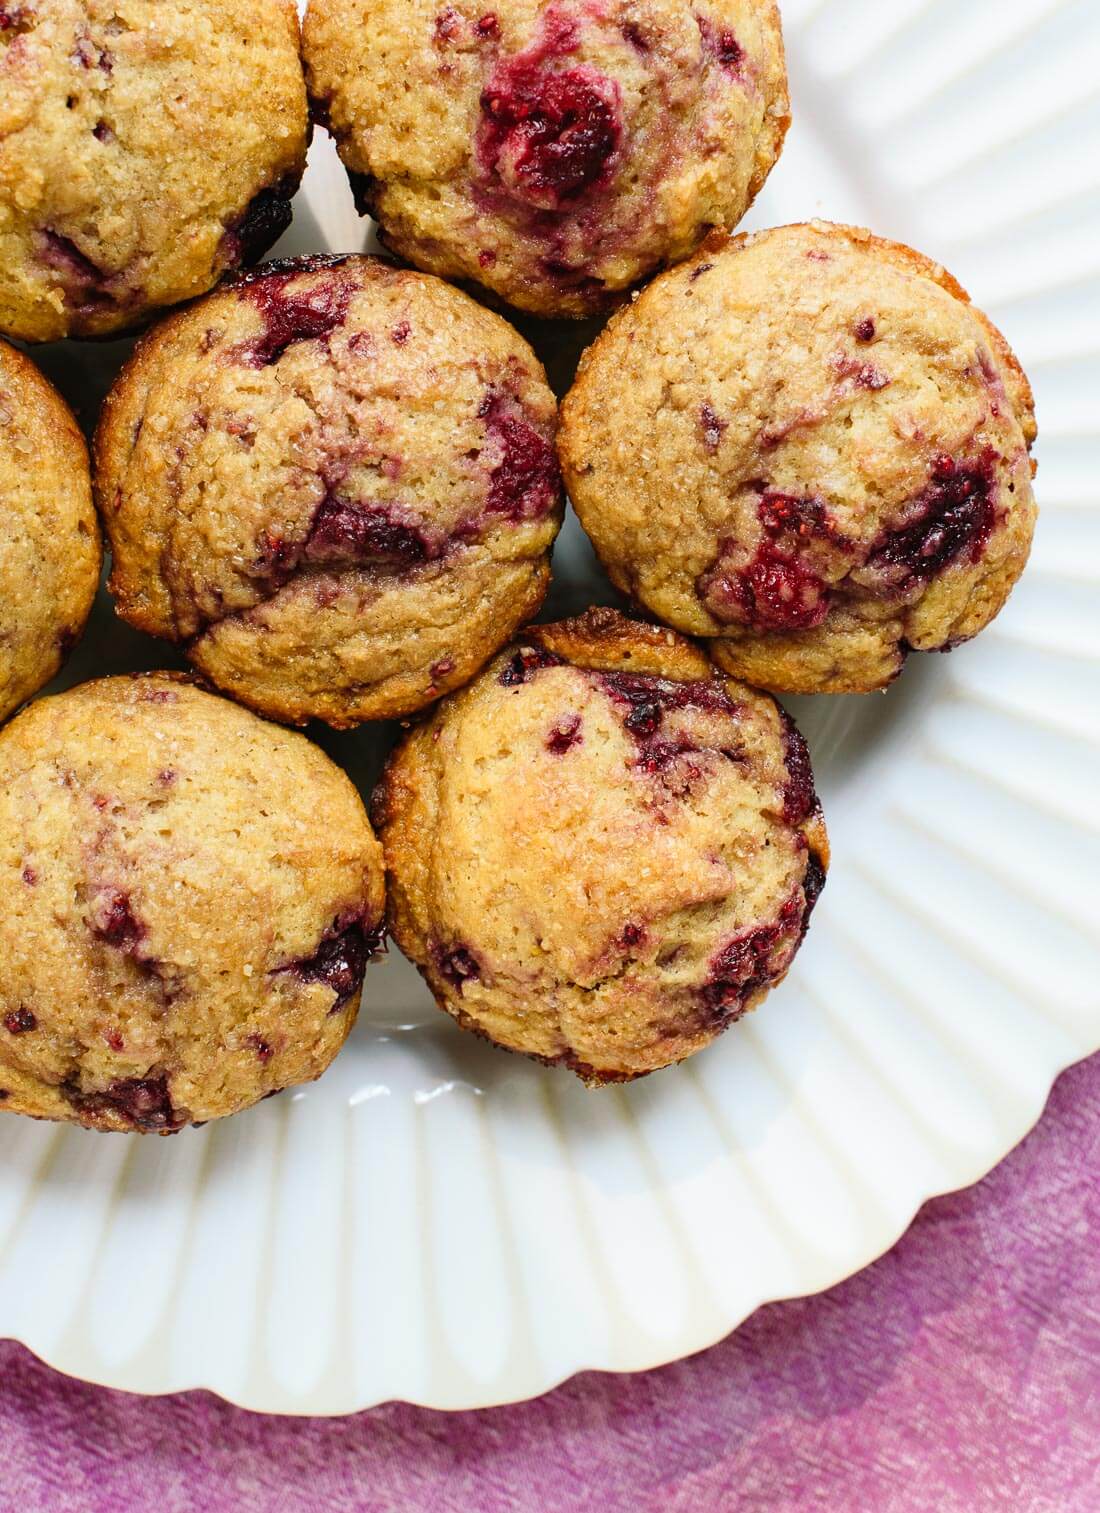 Healthy raspberry muffins recipe (so fluffy and delicious!) - cookieandkate.com